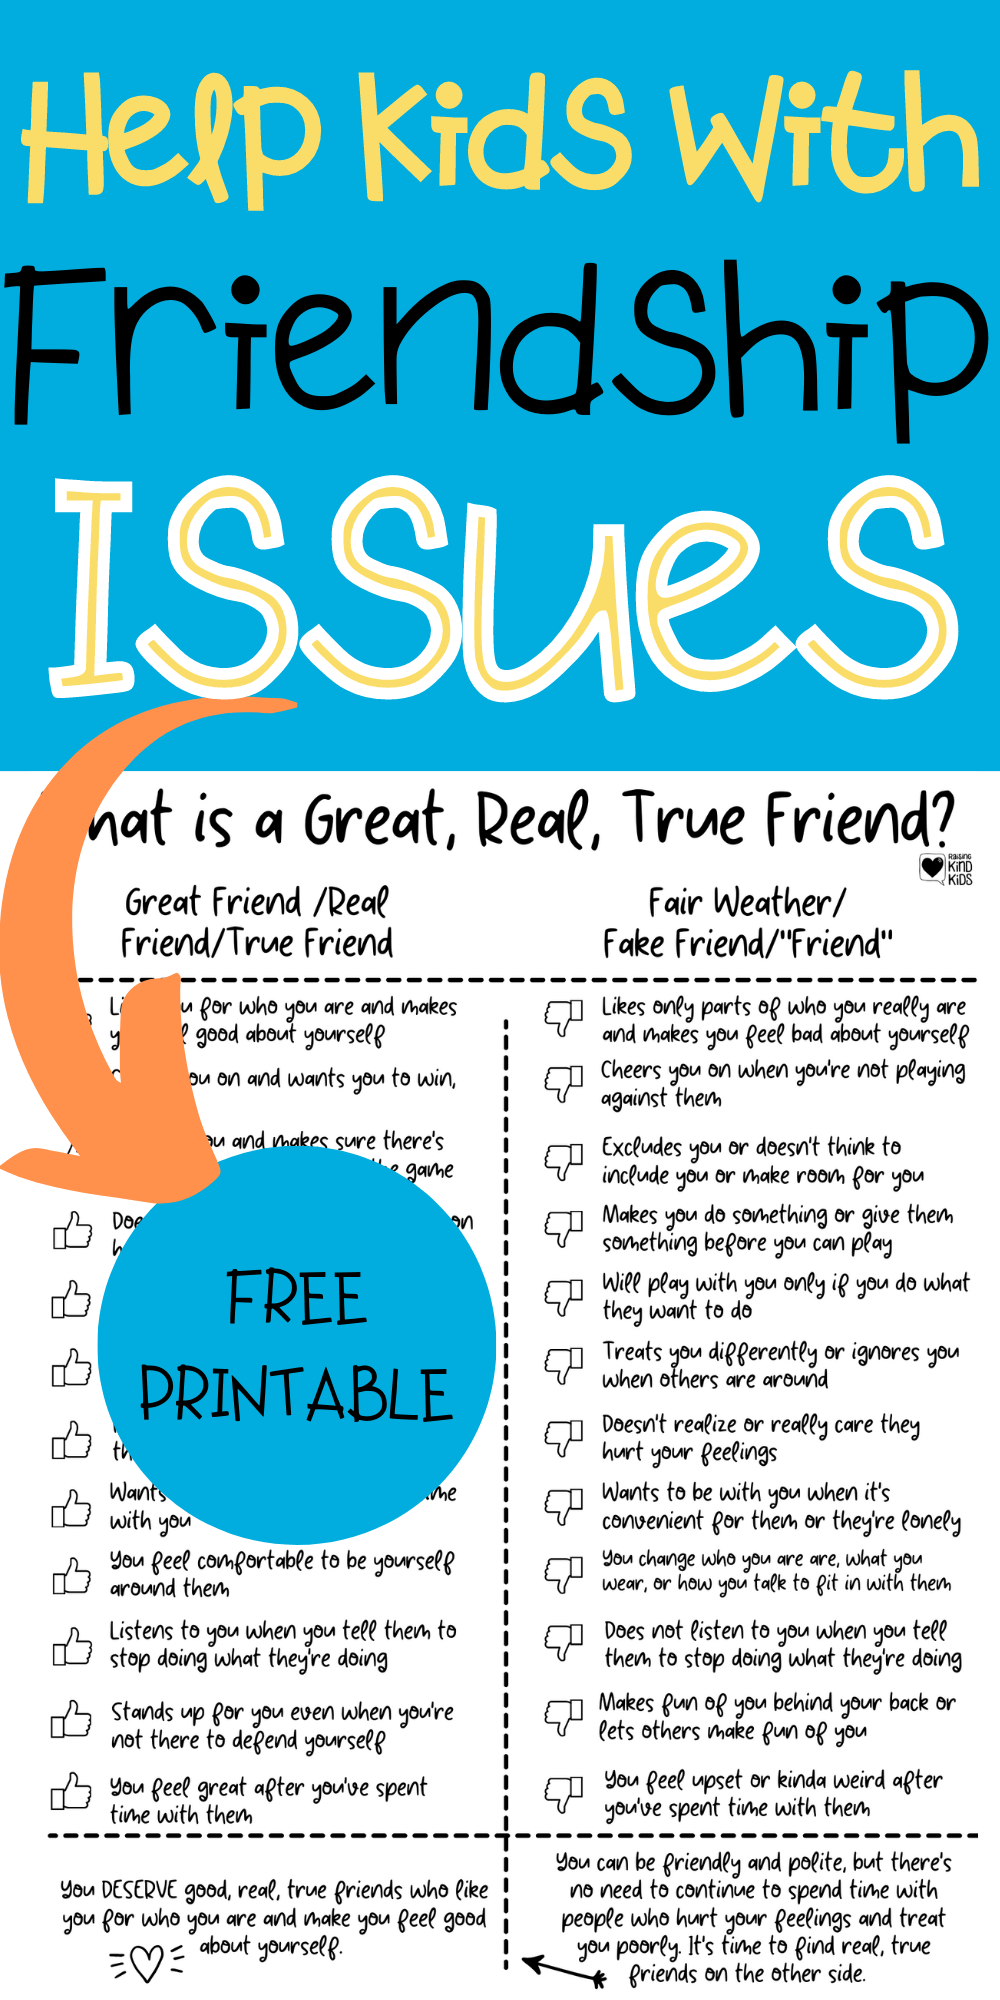 Help your kids decide for themselves who their good, real, true friends are with this friendship checklist to help them deal with friendship issues.